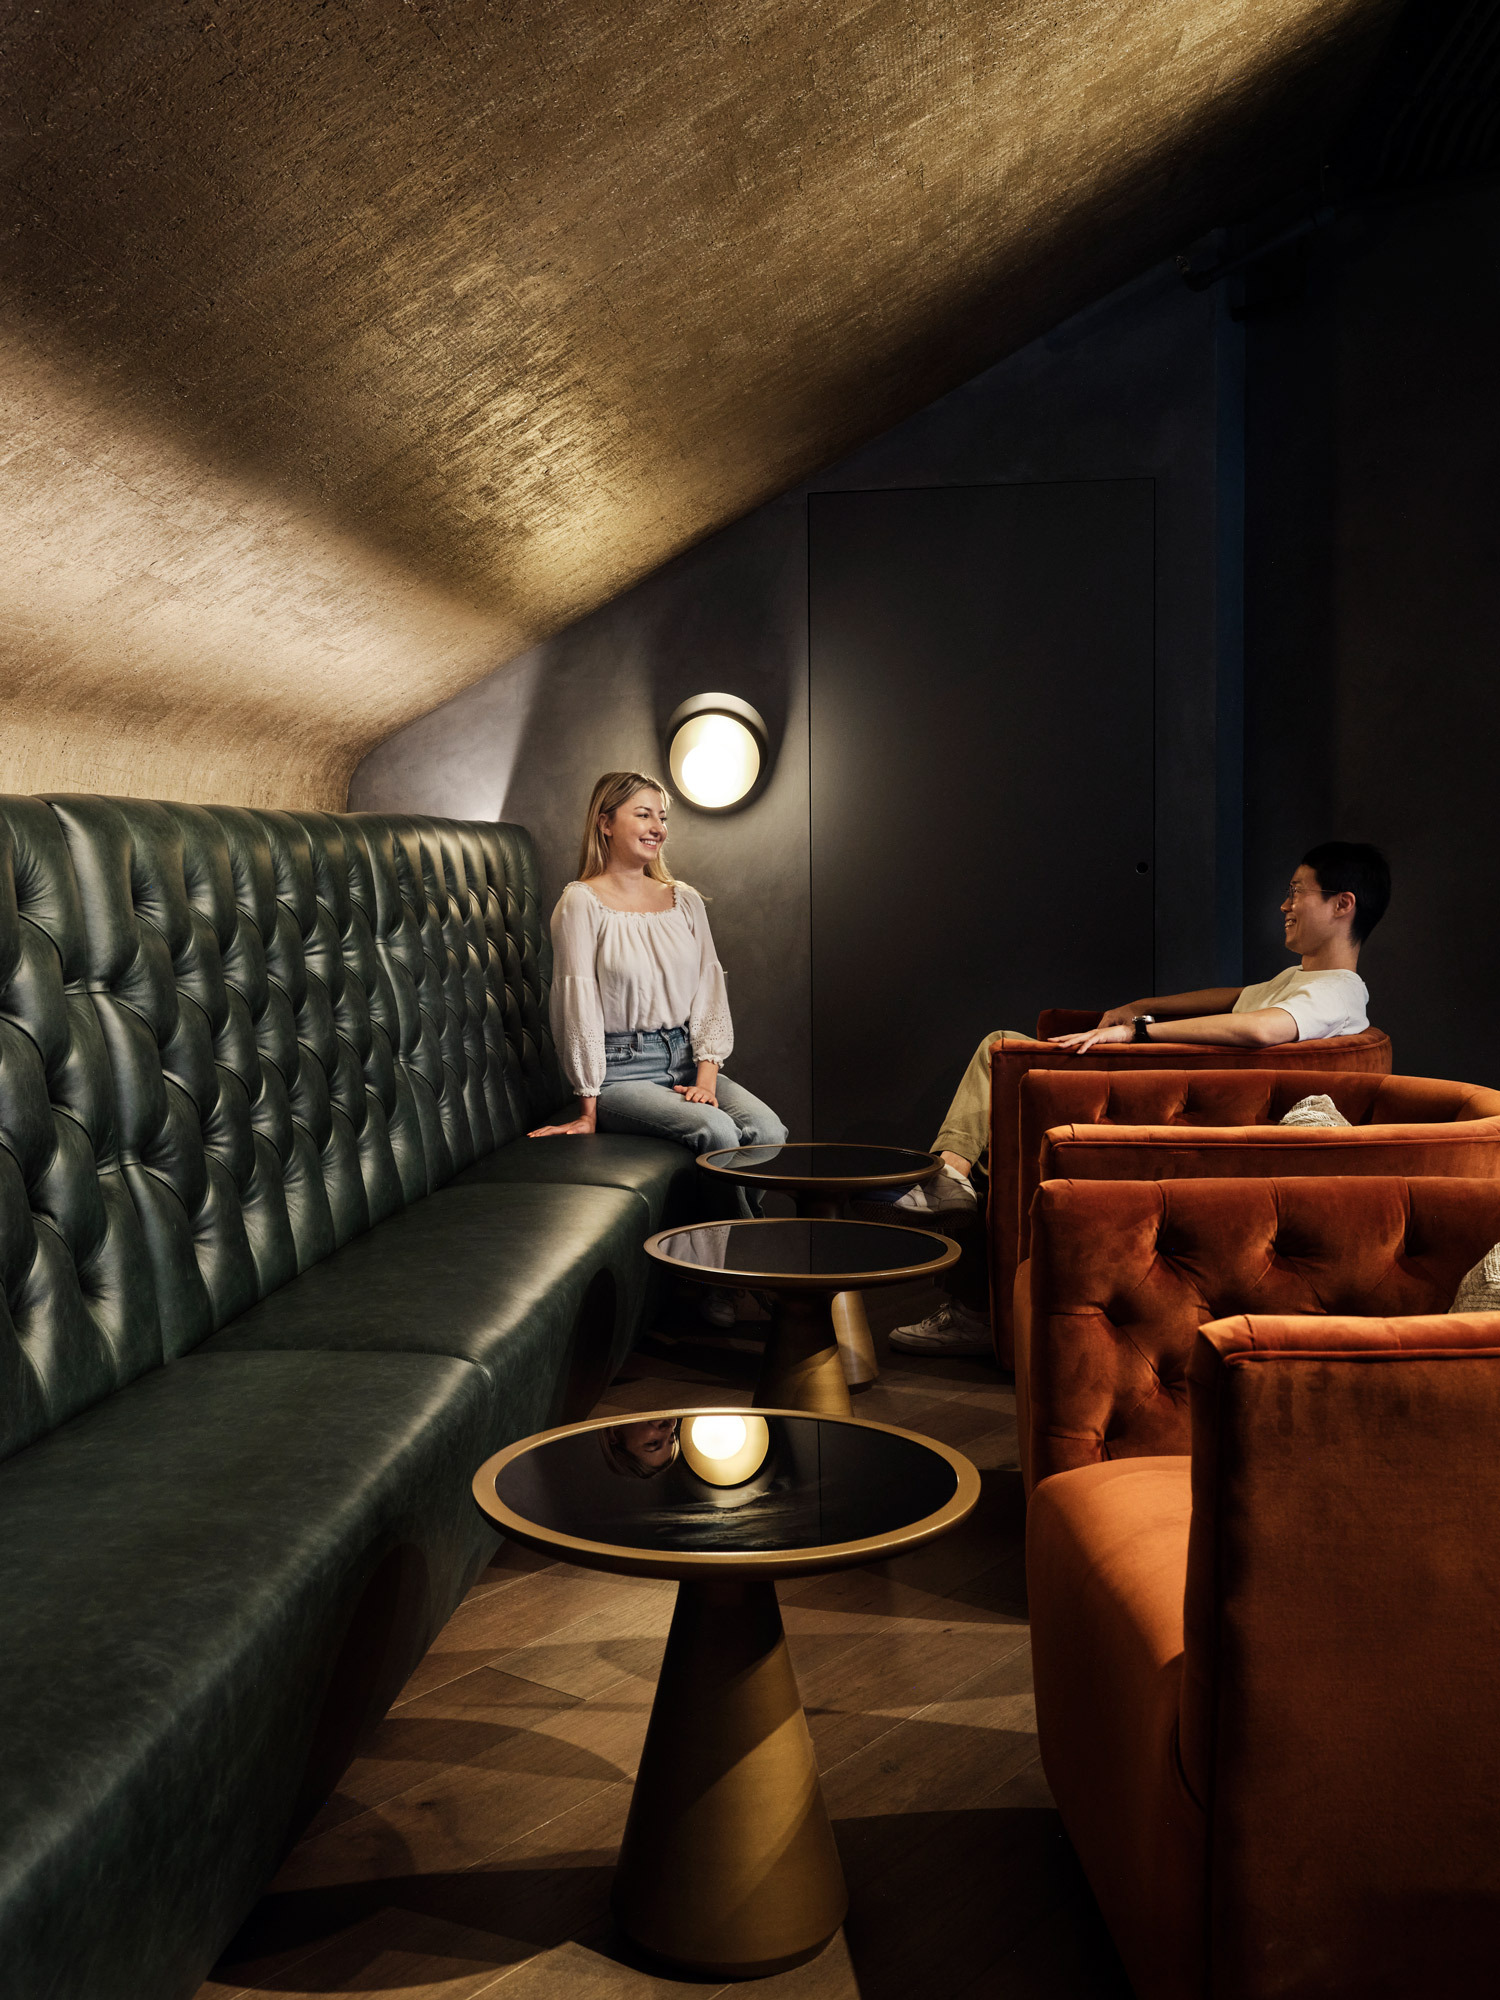 Soft lighting accentuates the luxurious textures within this upscale lounge, where richly tufted emerald green leather booths contrast with sumptuous terracotta armchairs, and sleek gold-toned side tables provide a sophisticated touch amidst the moody ambiance.